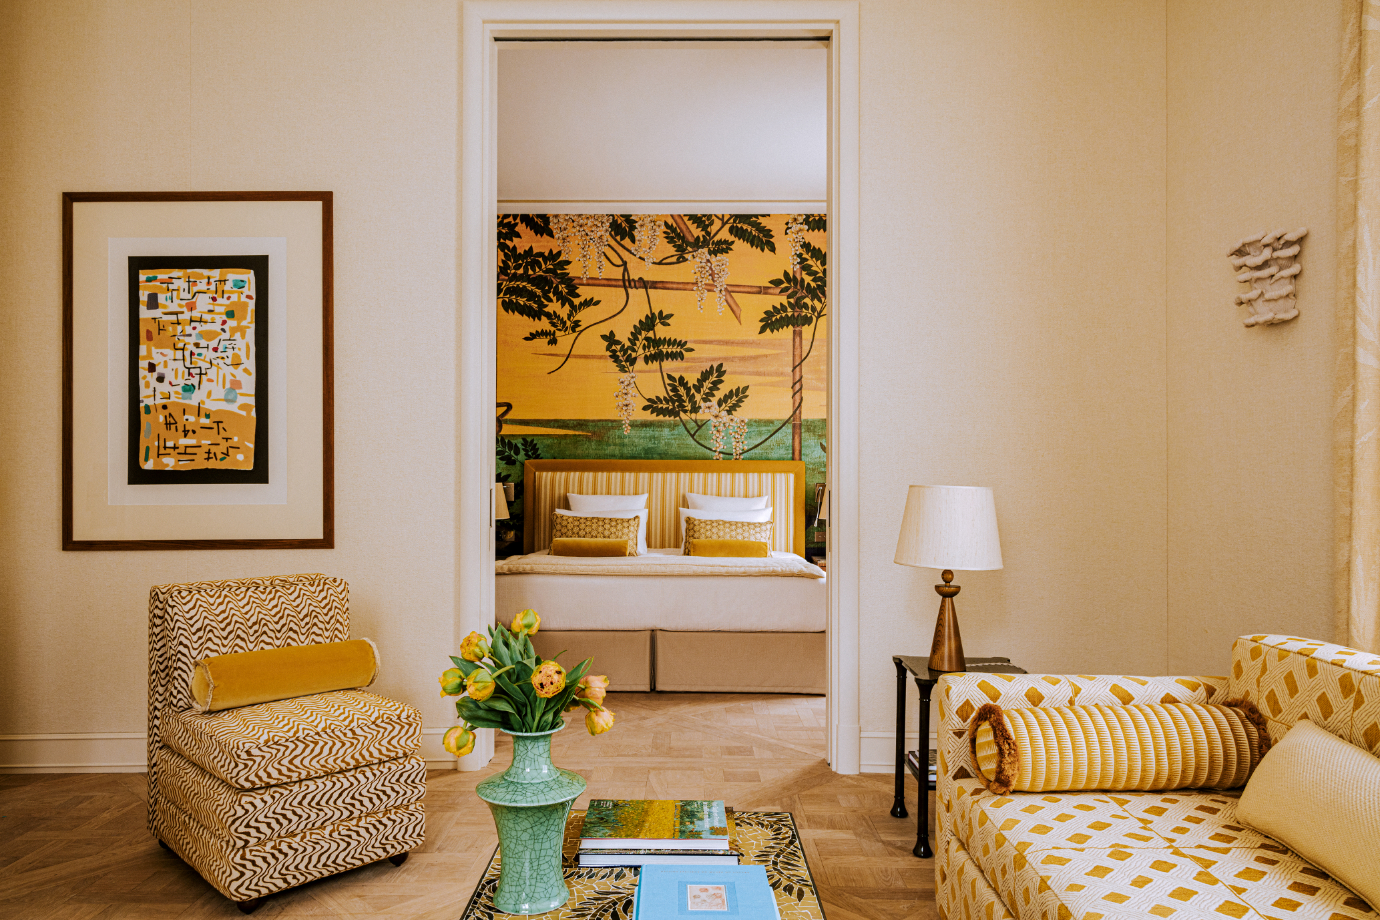 A golden-hued Junior Suite at Saint James Paris with African inspired prints, green marbled vases, wisteria printed wallpaper, contemporary art and plush sofas